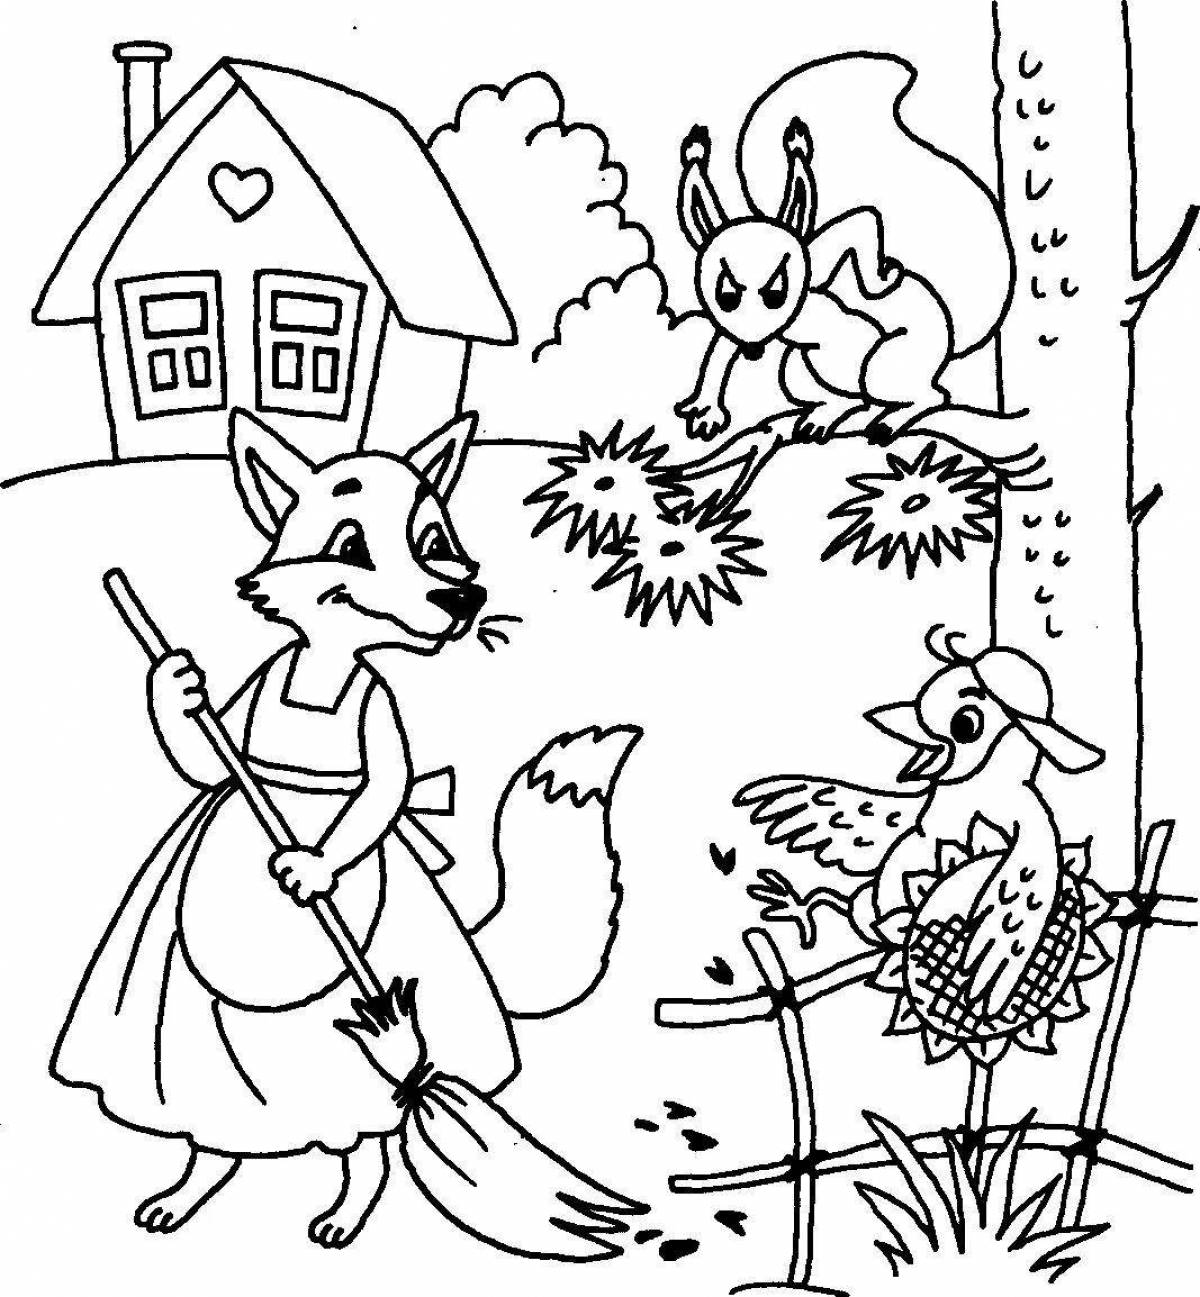 Playful coloring fairytale fox with a rolling pin